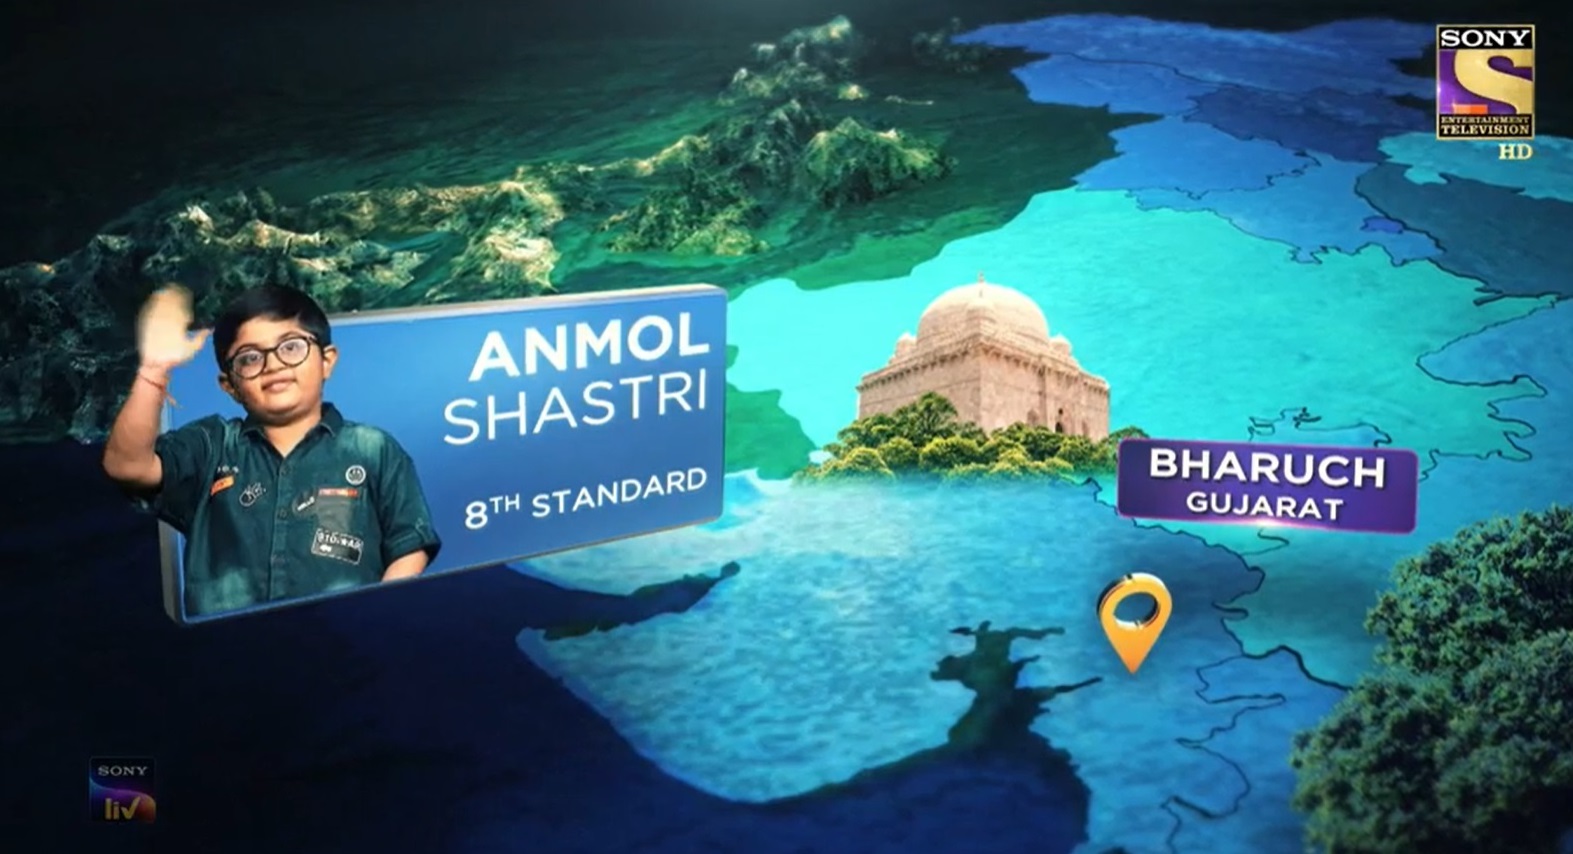 KBC First Contestant of the week : Anmol Shastri KBC Contestant from Bharuch, Gujarat